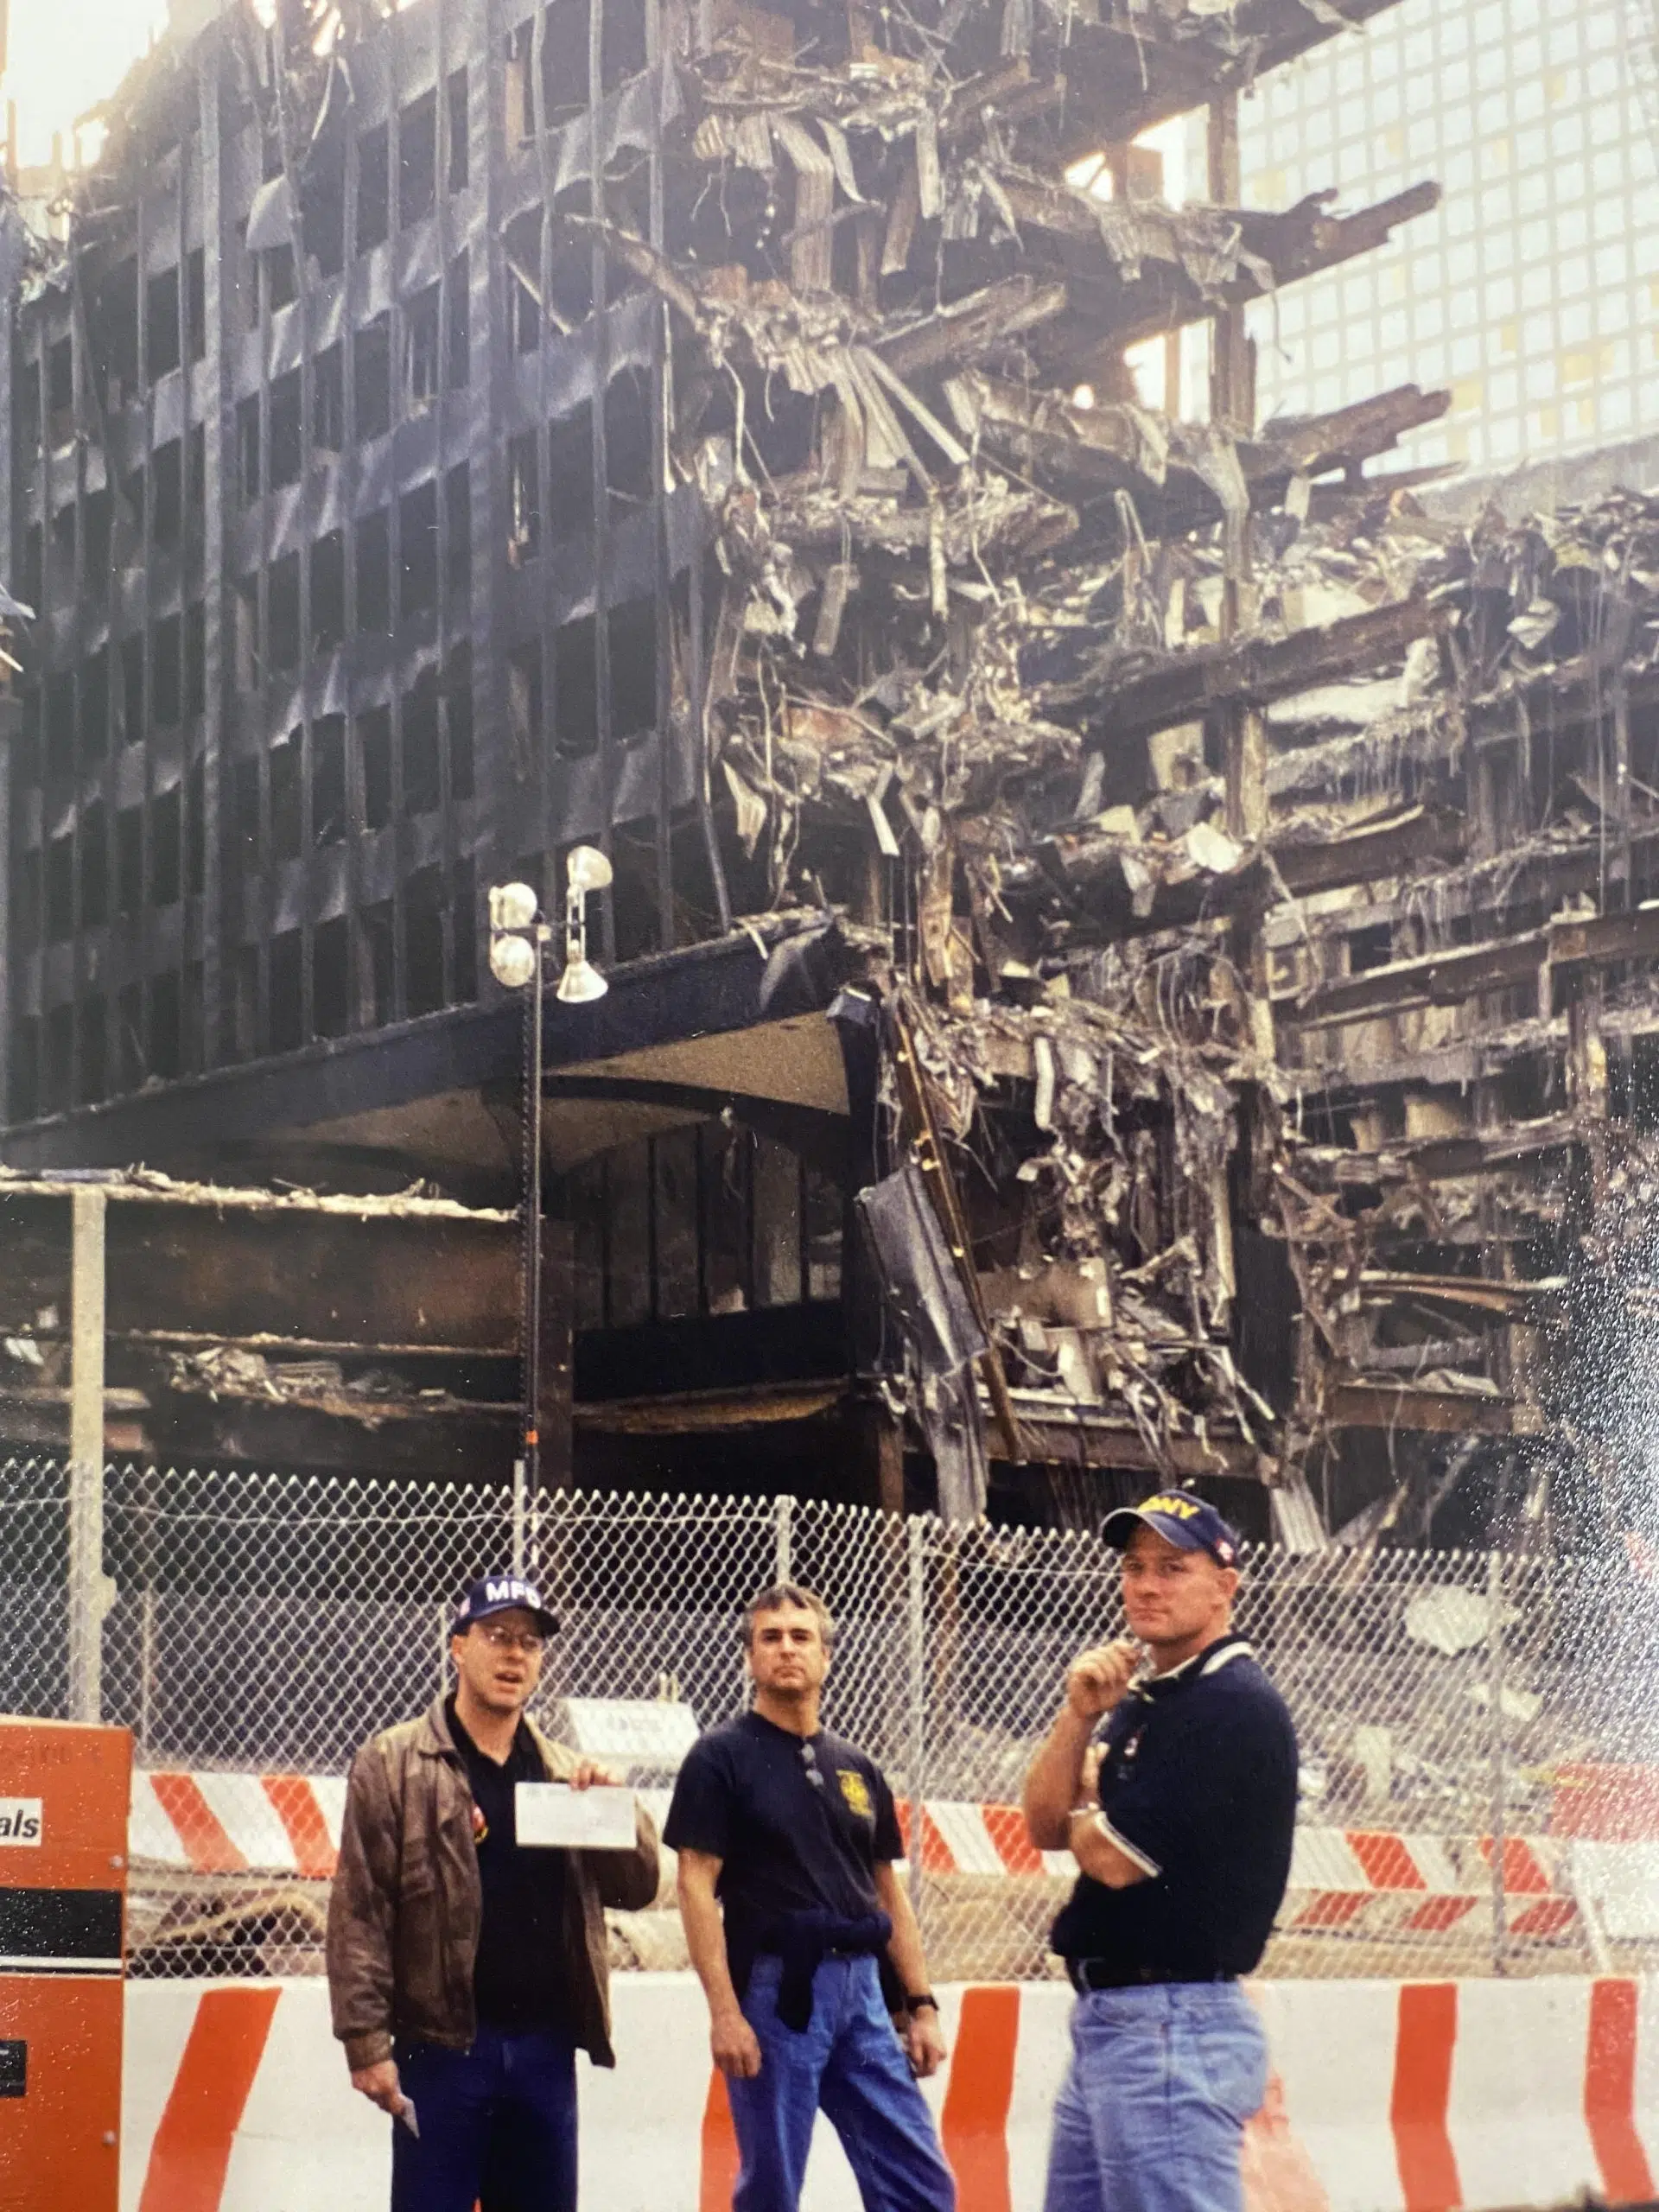 Retired Firefighter Remembers Ground Zero After 9/11